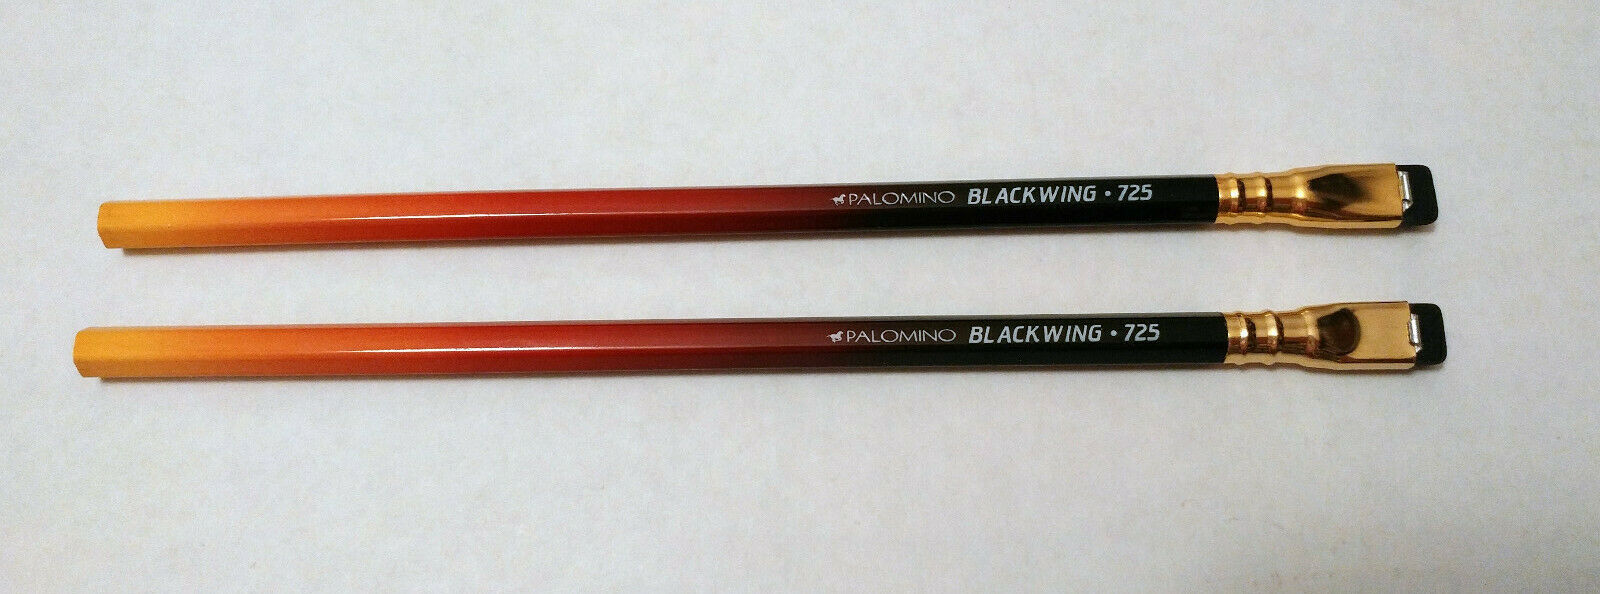 Blackwing Volumes 725 -- 2 individual pencils New Unsharpened sold out